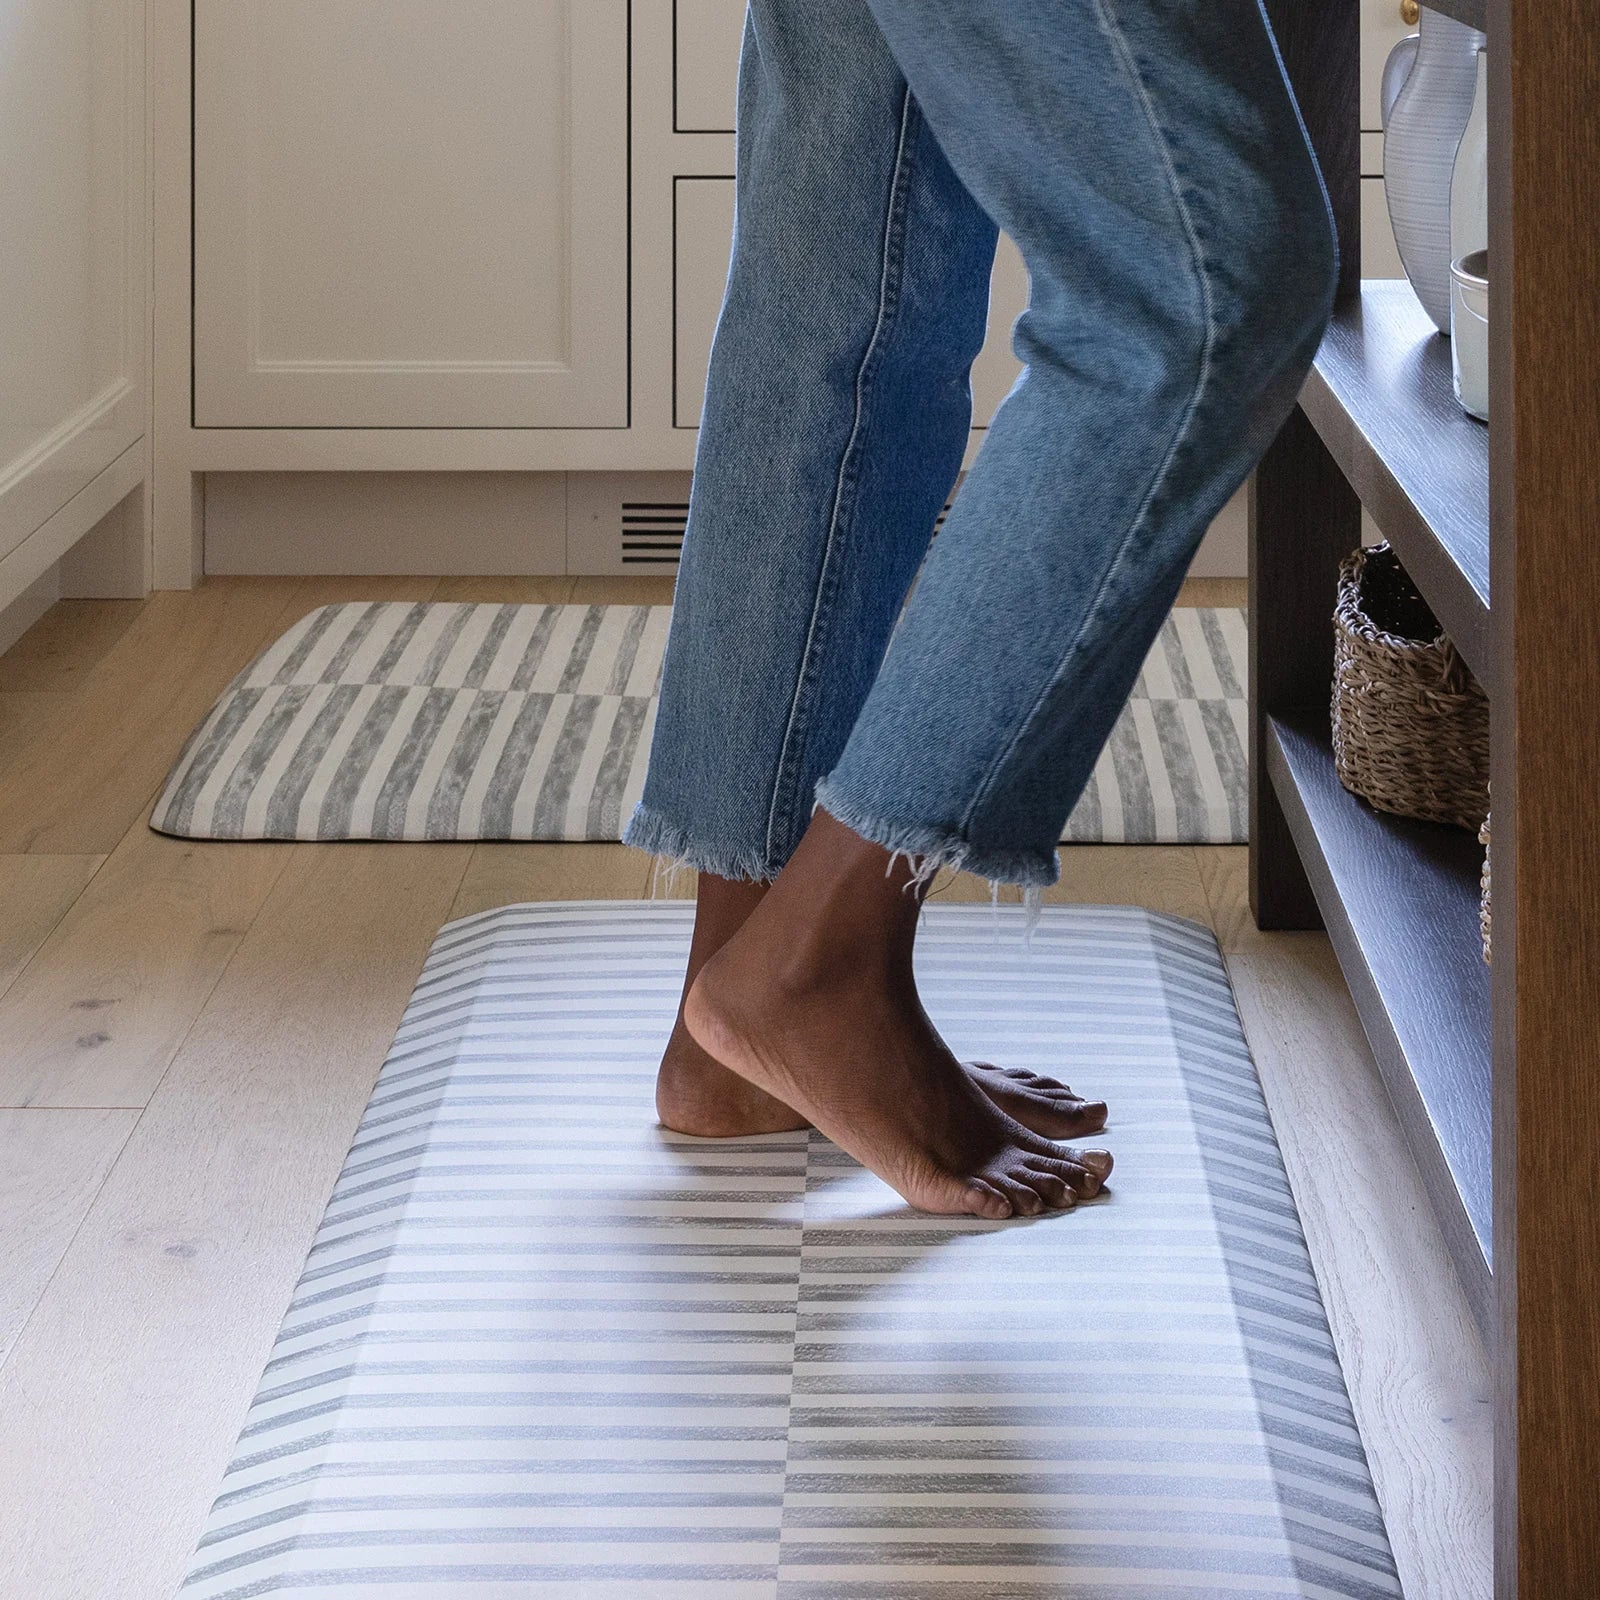 Reese pewter gray and white inverted stripe standing mat shown with woman's feet standing on the mat in a kitchen